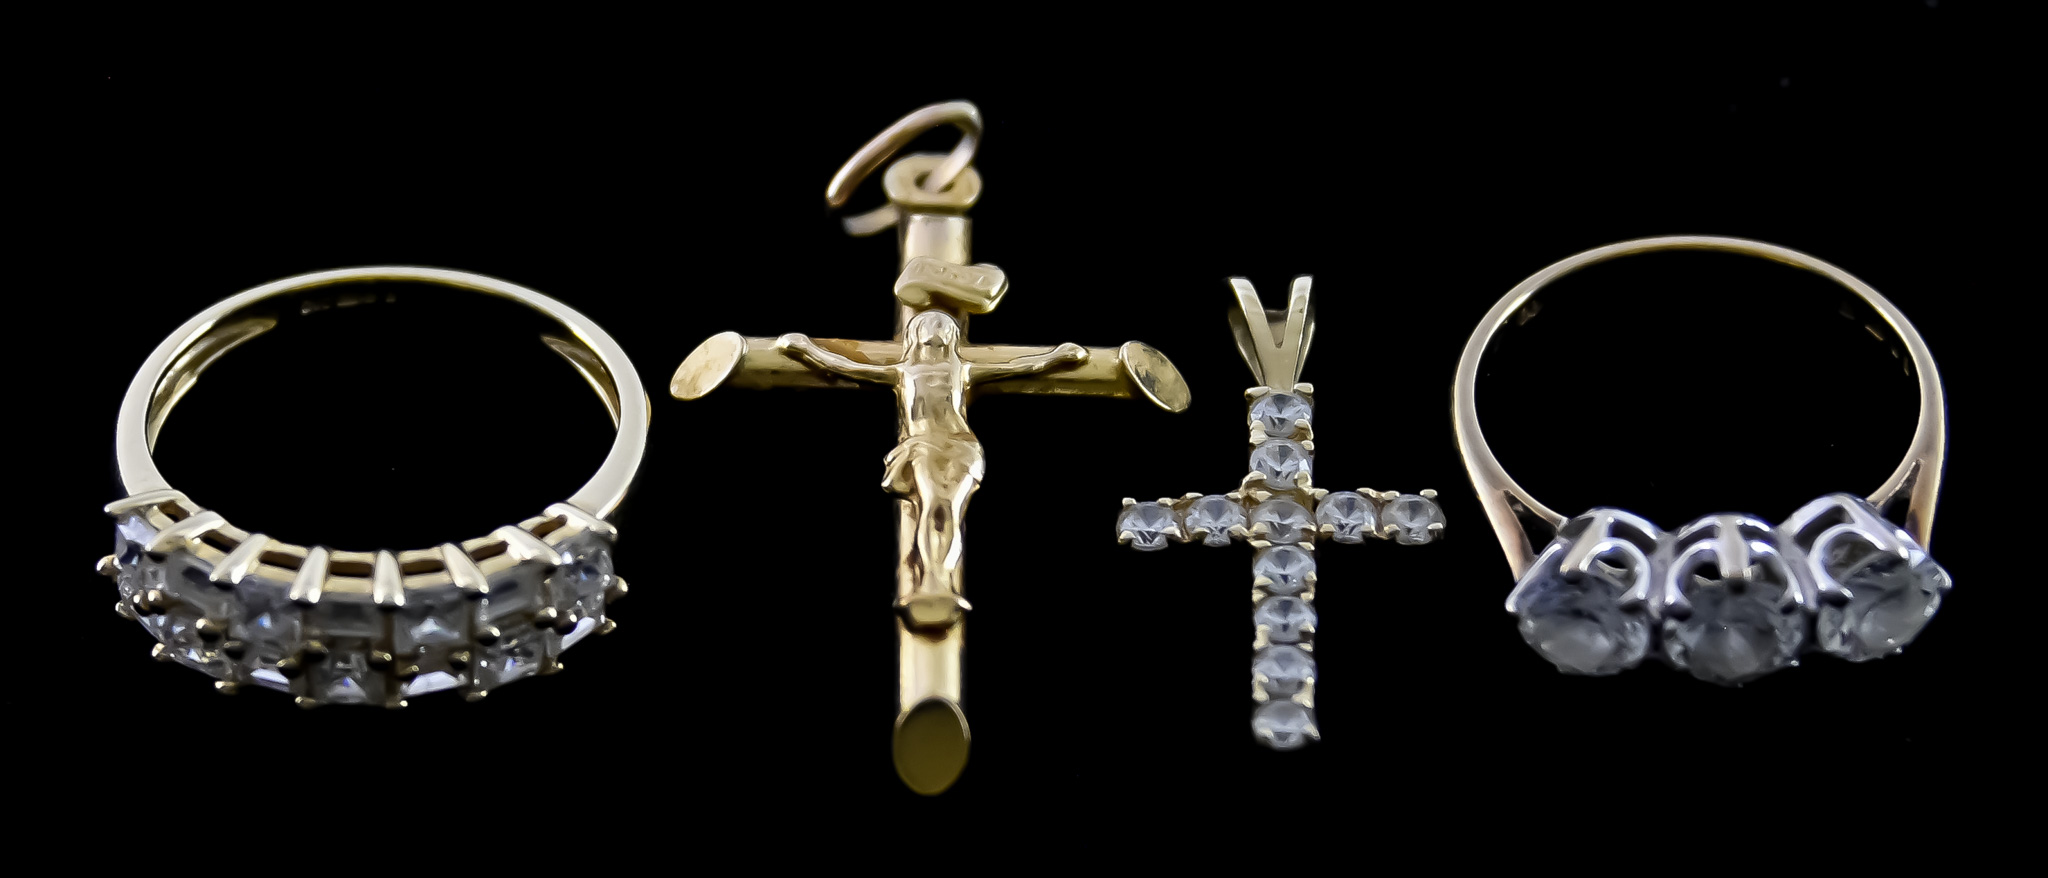 A Mixed Lot of Gold, comprising - 9ct gold crucifix, 40mm x 20mm, 9ct gold crucifix set with white